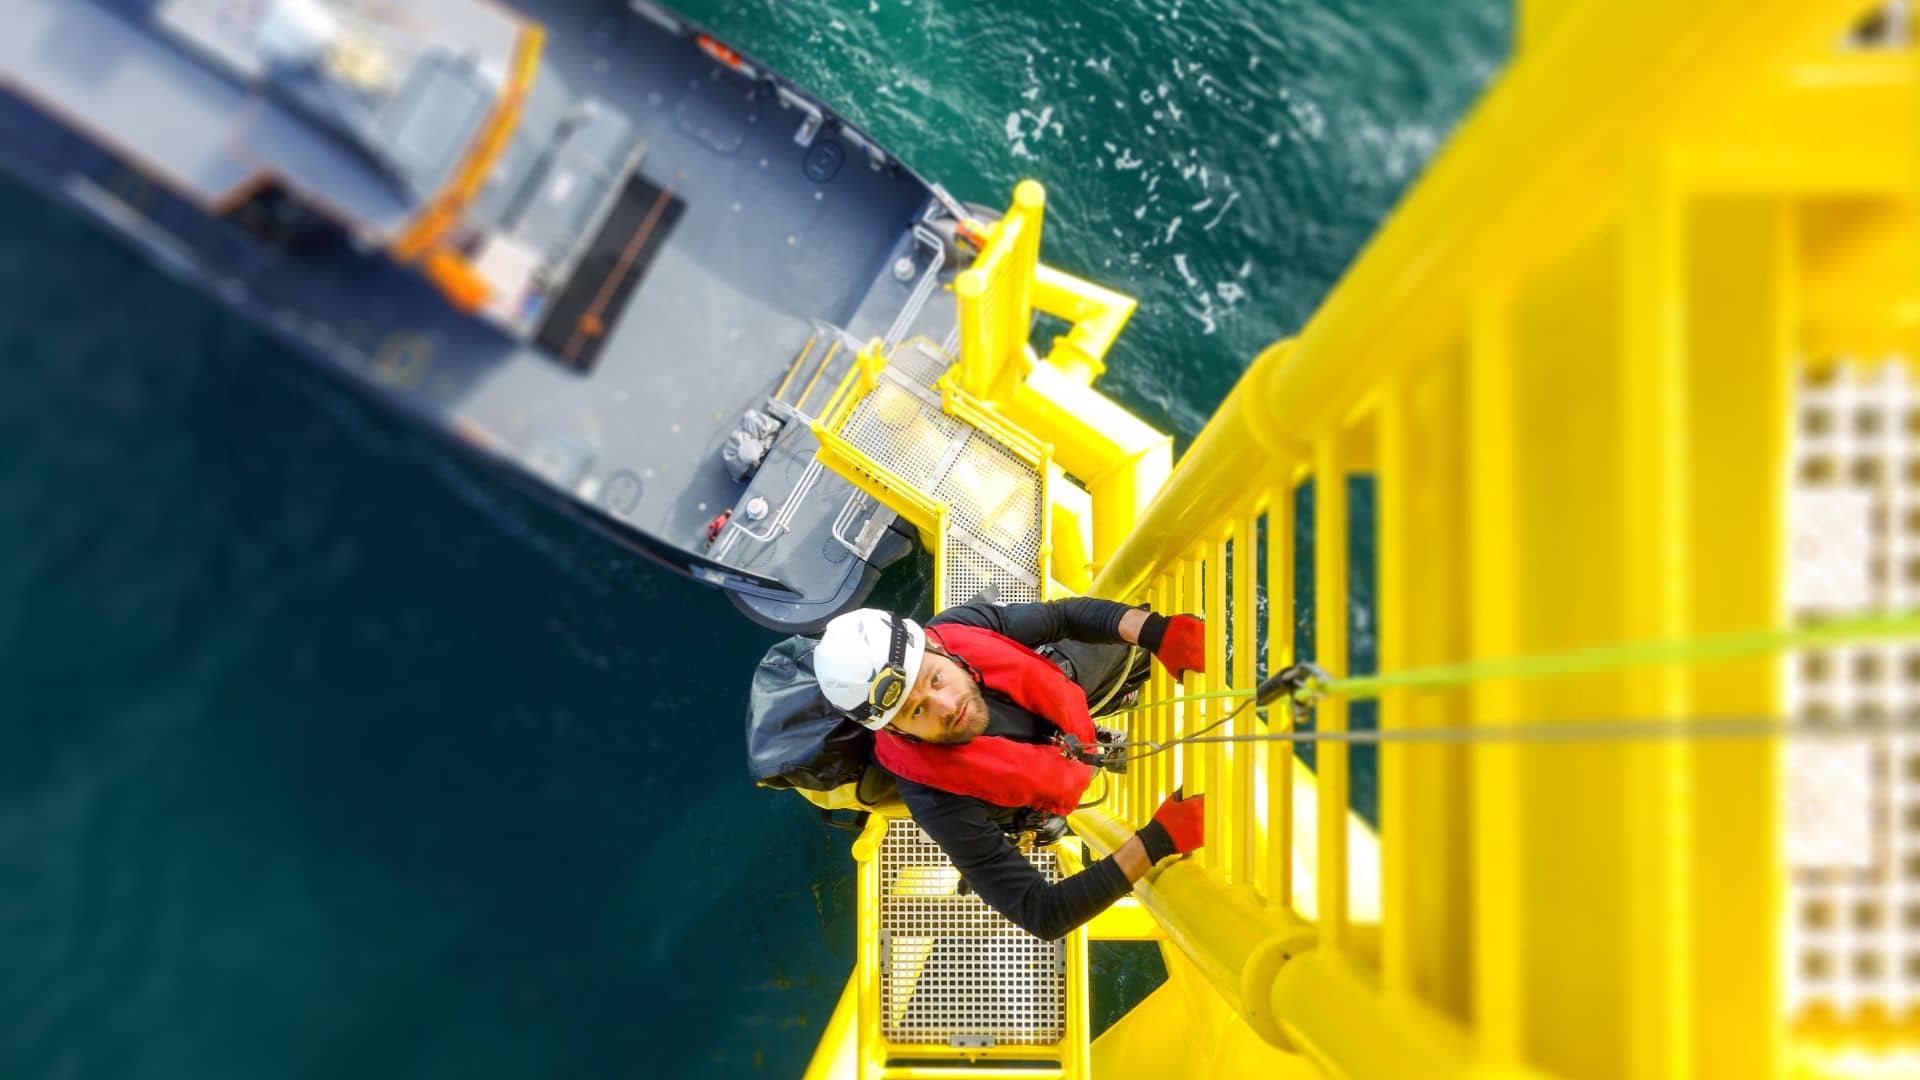 The use of resonance for safety on offshore platforms